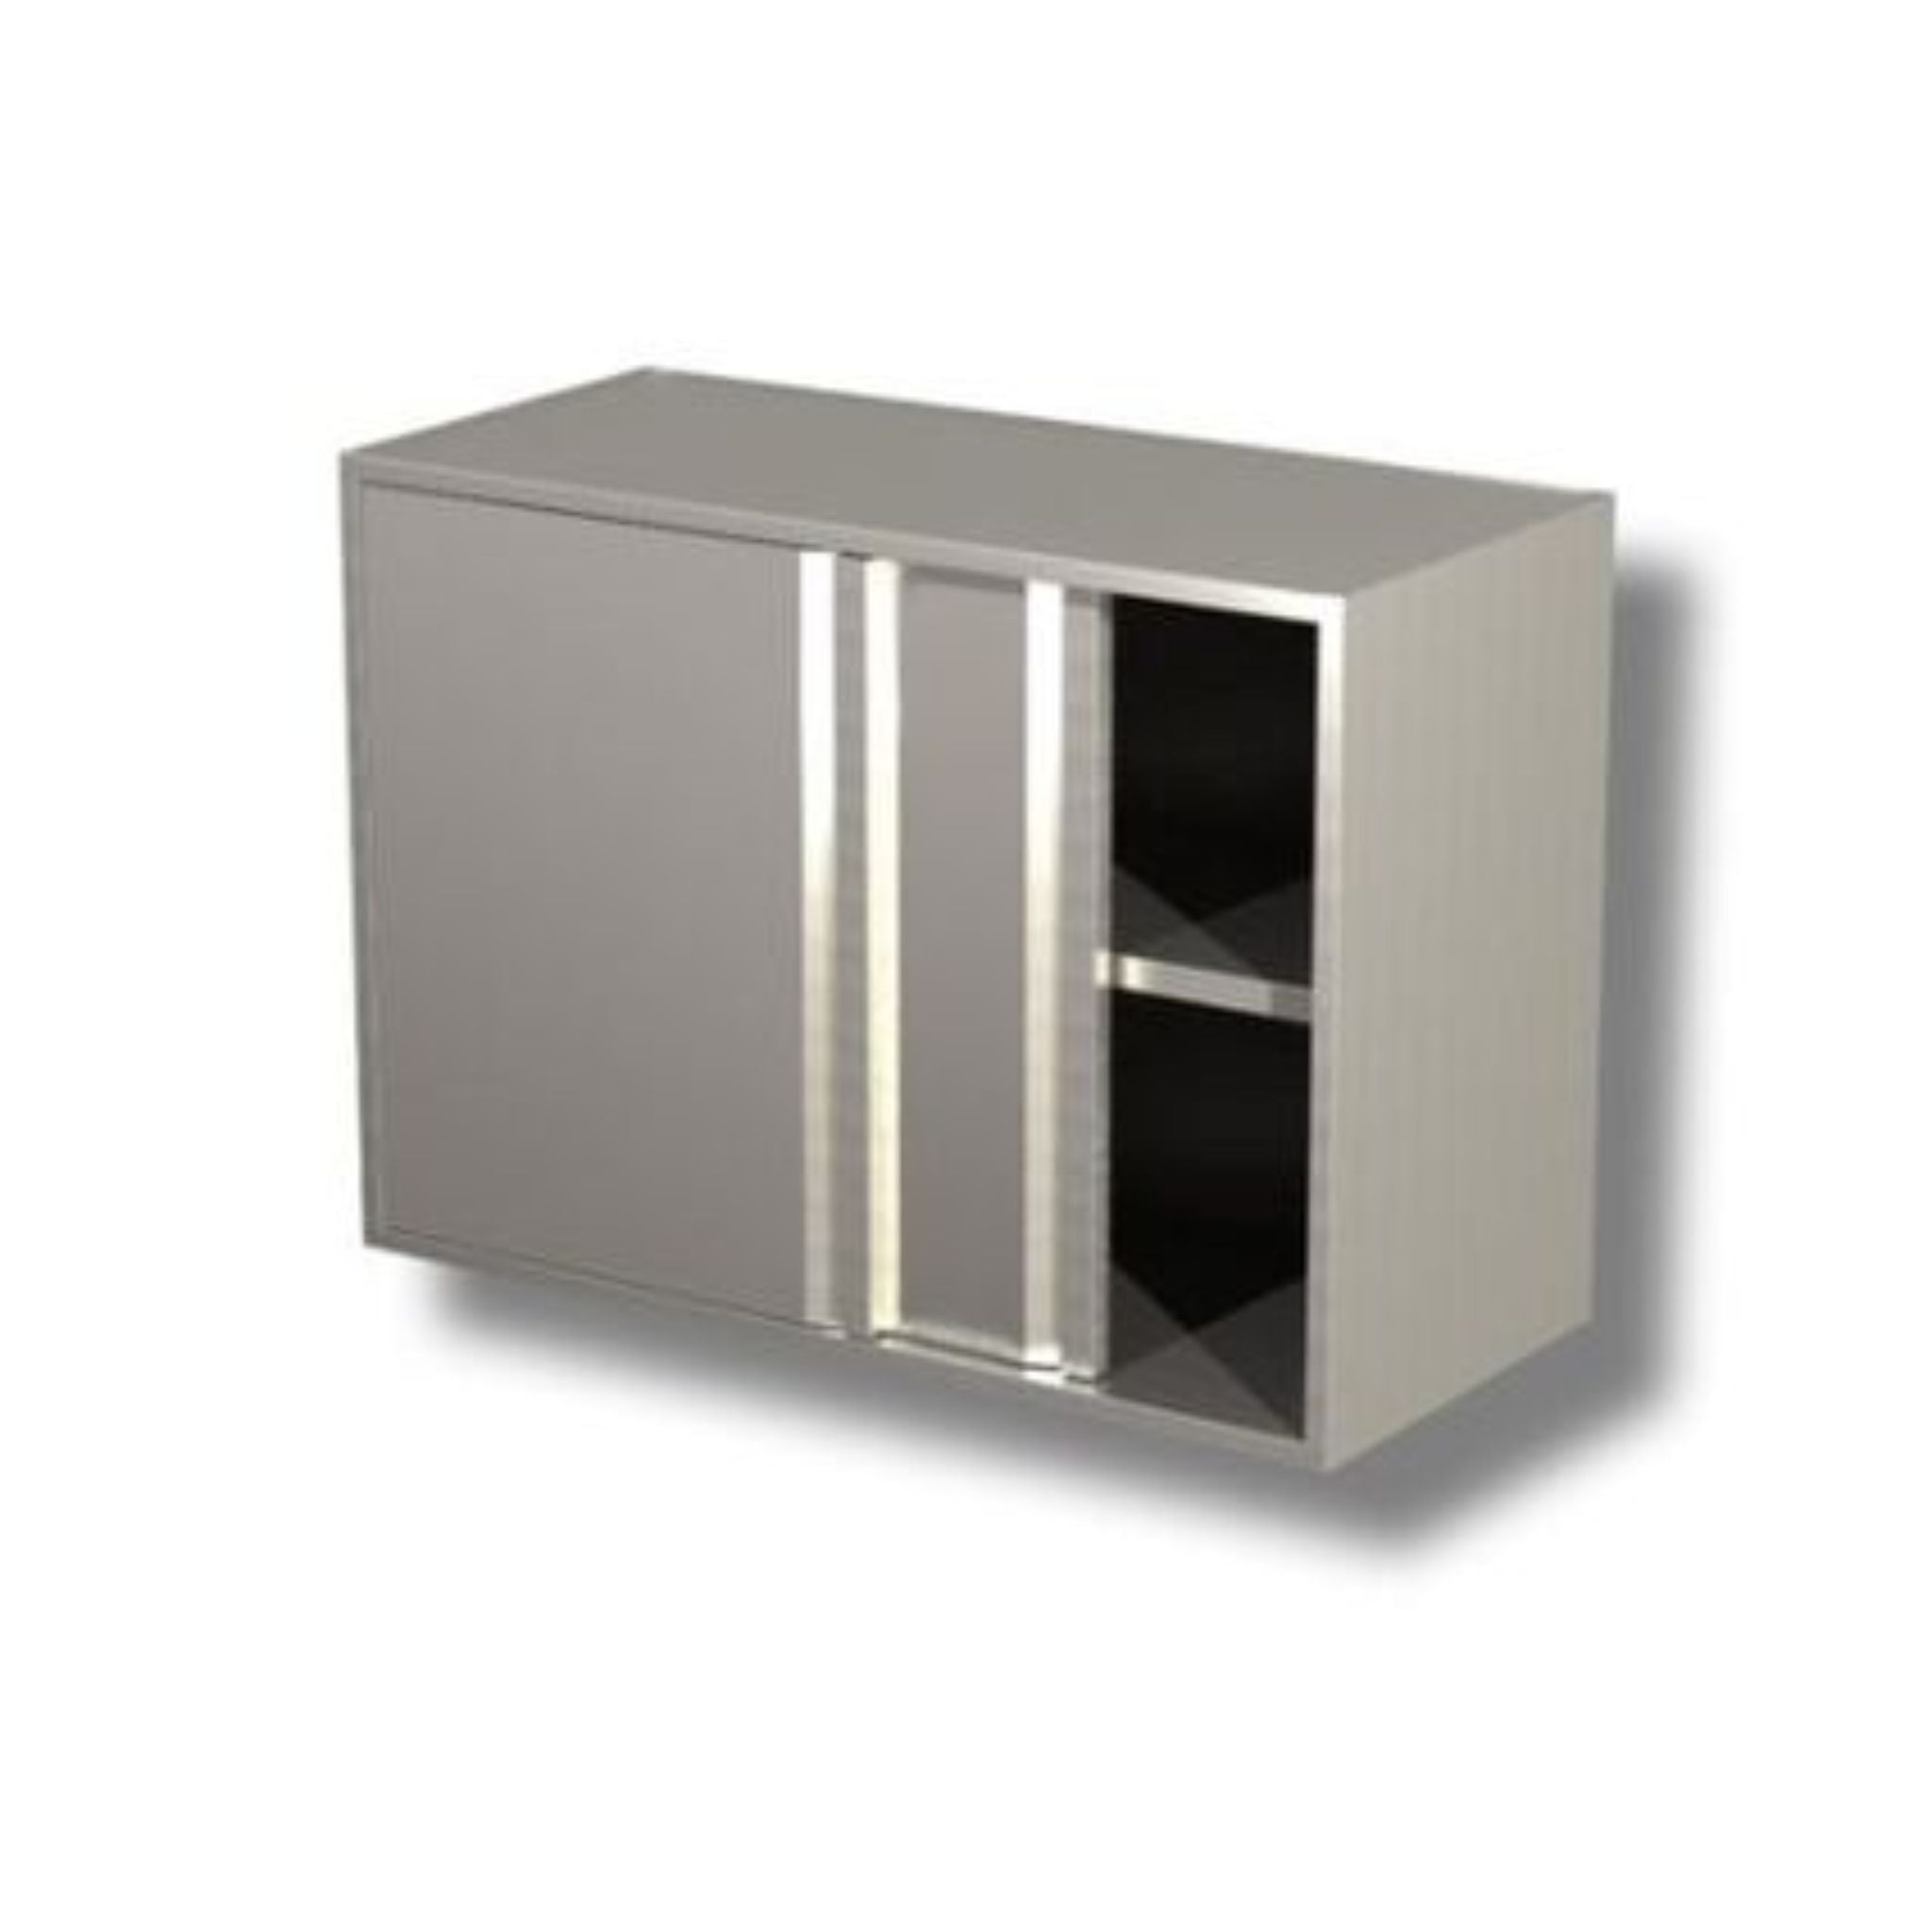 Stainless steel wall cabinet with standard sliding doors - 0